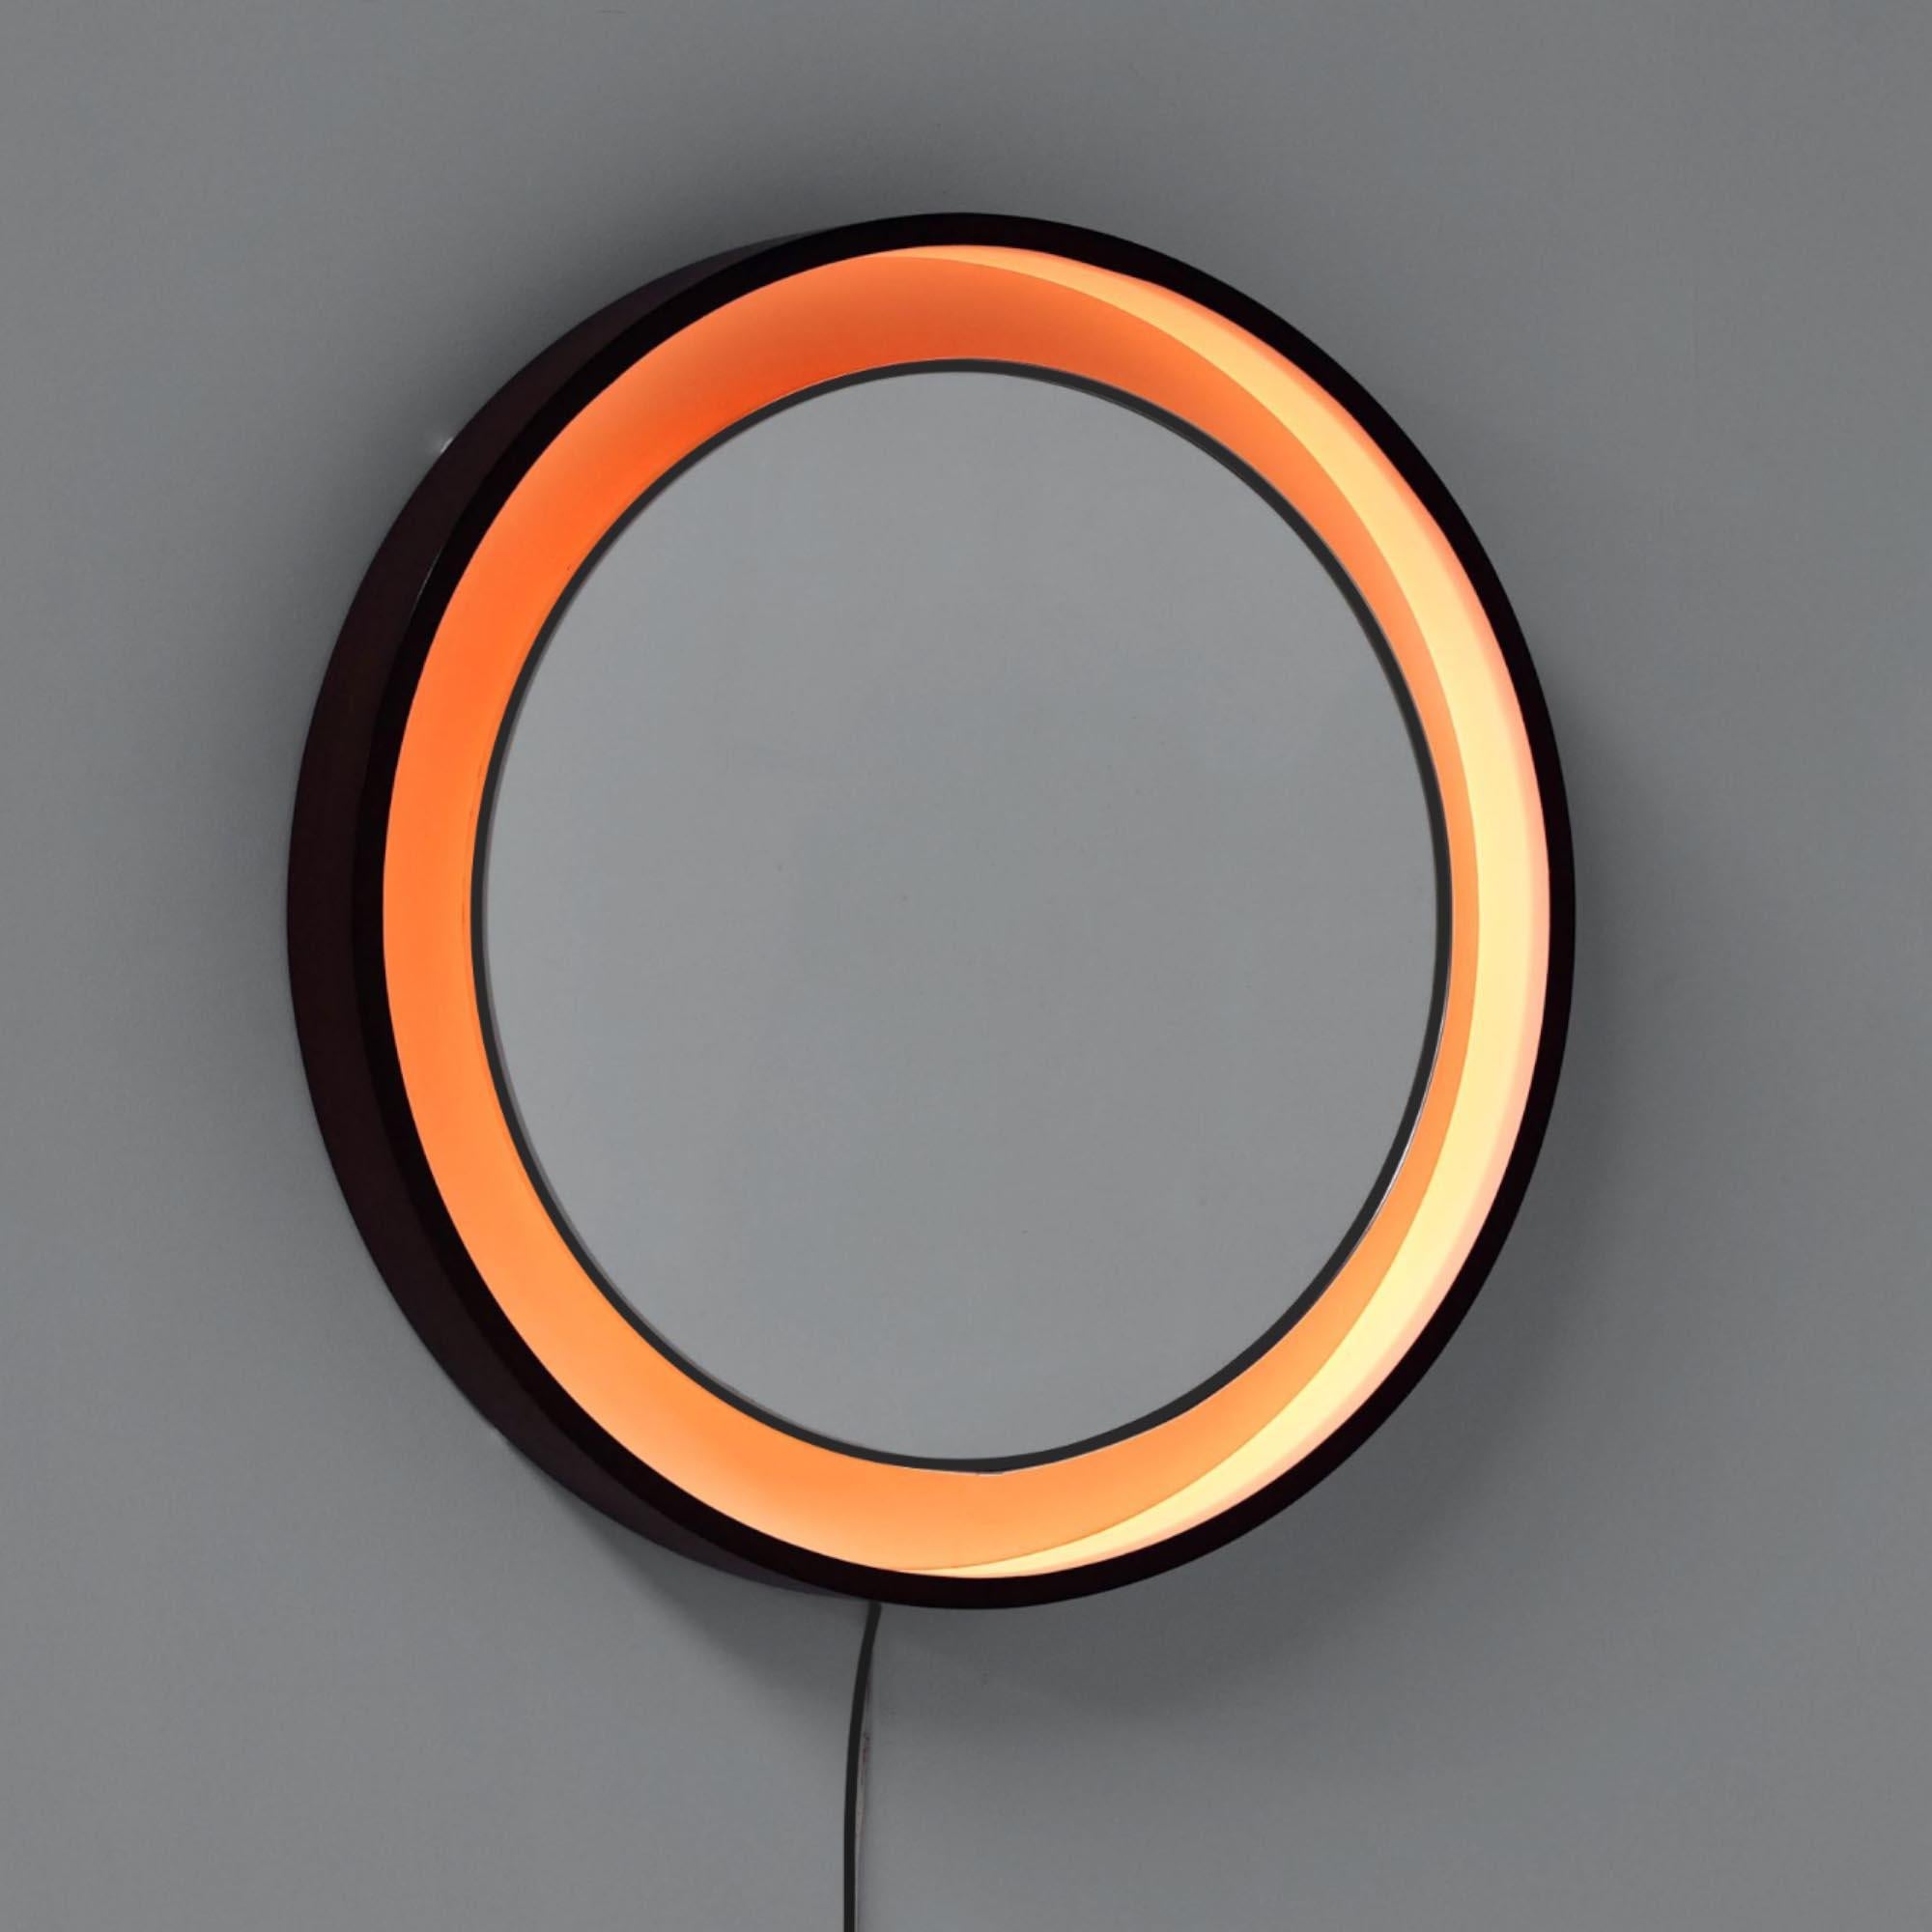 A large illuminated mirror with a circular light point hidden behind the mirror glass. Curved wood with cream-coloured interior with mirror element and backlighting. Looks great in any interior!

Italy, 1970s

Designer/Manufacturer: Unknown

In very